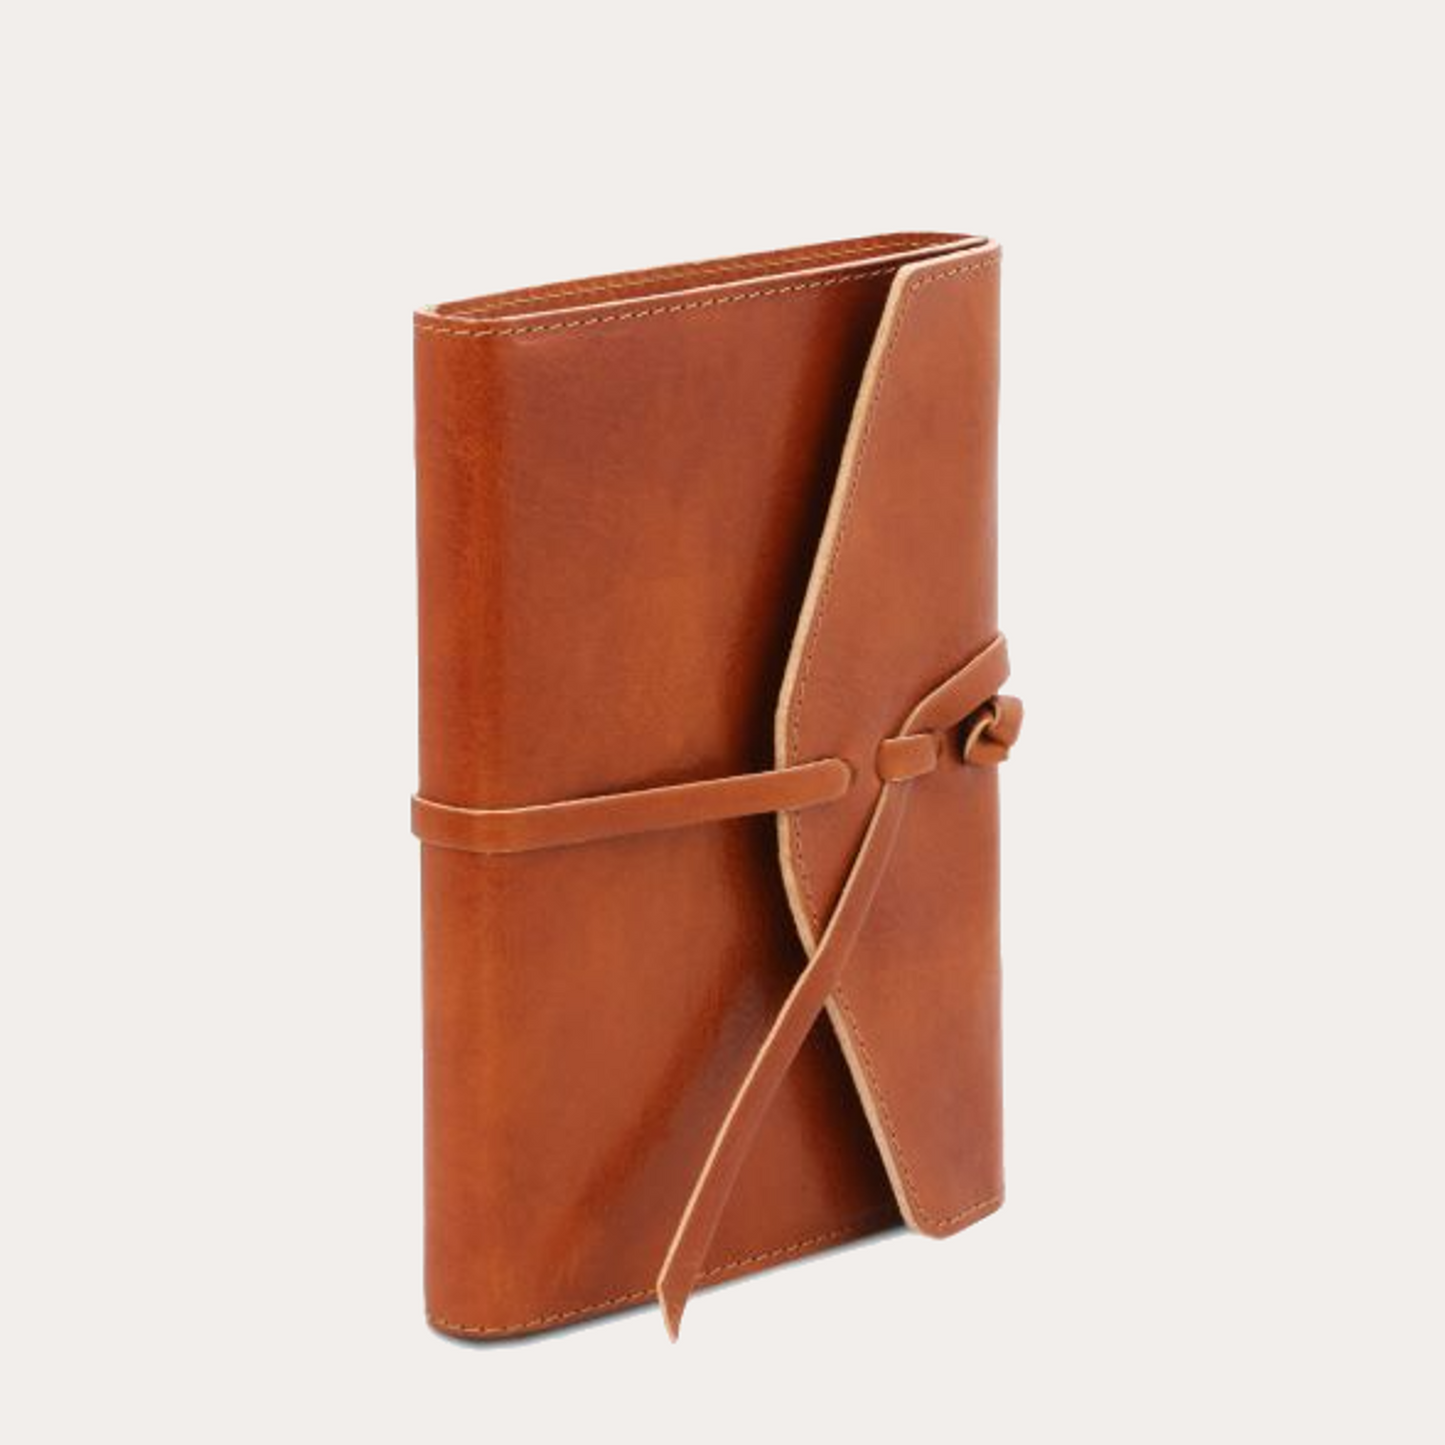 Tuscany Leather Cognac Leather Journal / Notebook